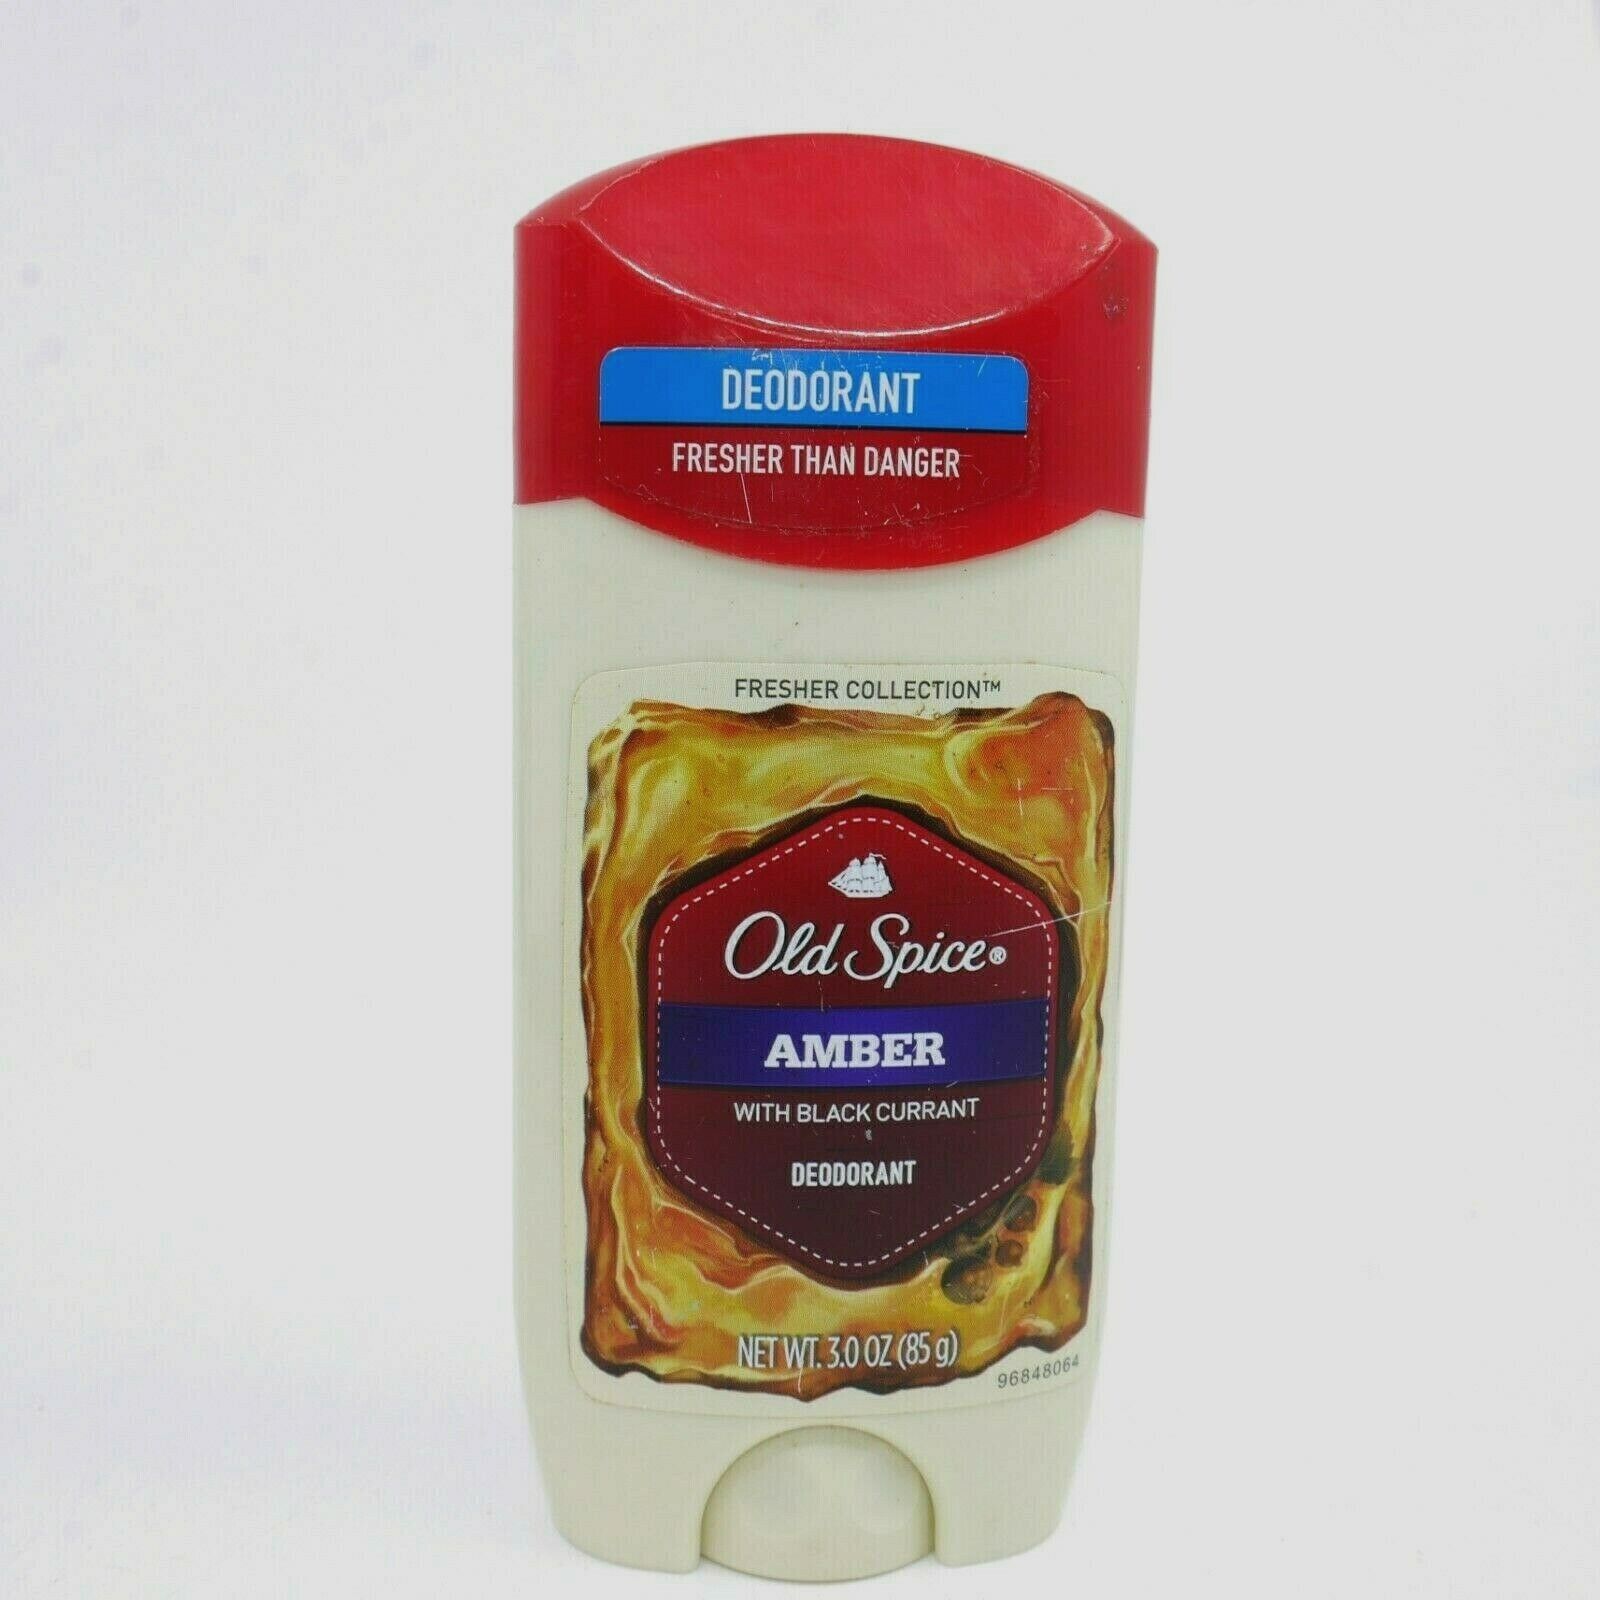 1- Old Spice AMBER w/ Black Currant deodorant Fresher Collection